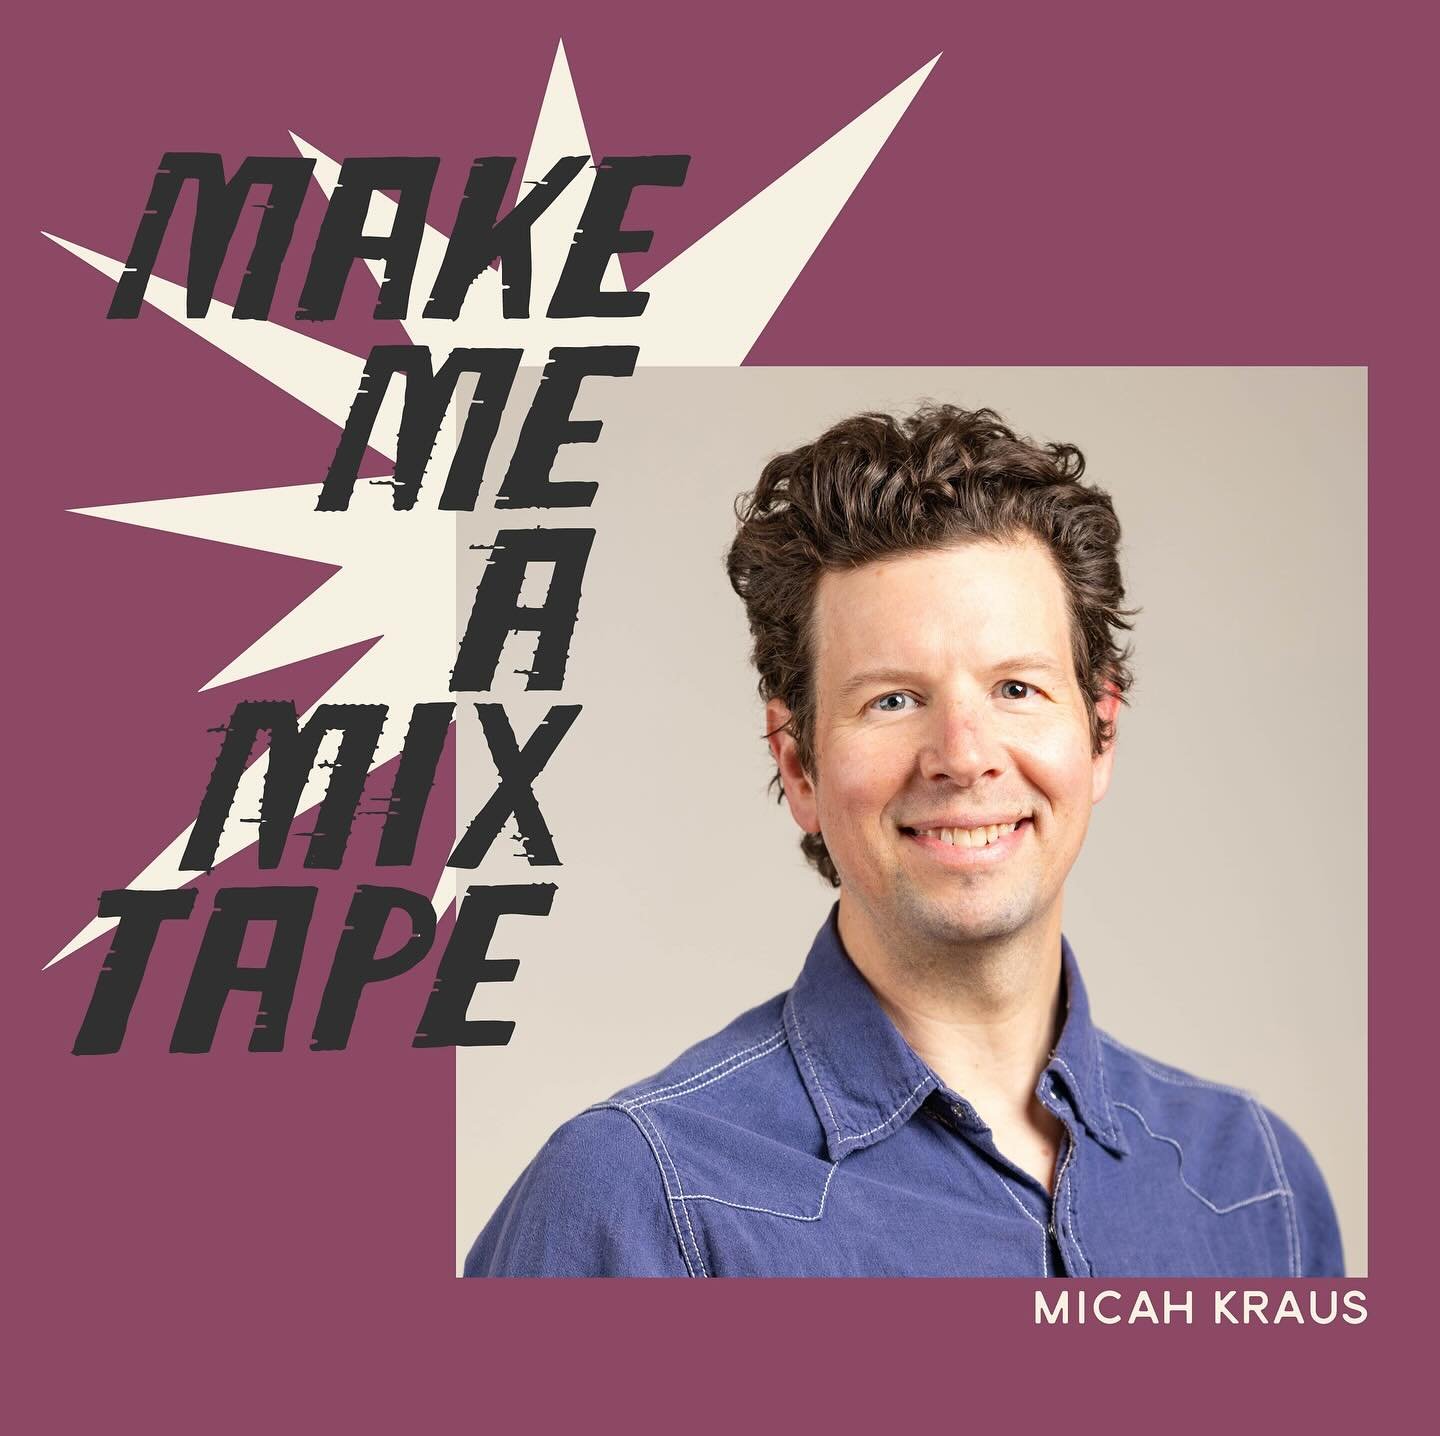 Everyone meet Micah Kraus! Micah is part of our upcoming print exchange, MAKE ME A MIXTAPE, where artists were asked to create a piece that would pair with their ideal mixtape 📼 

Micah Kraus is an artist and educator living in Akron, Ohio. He opera